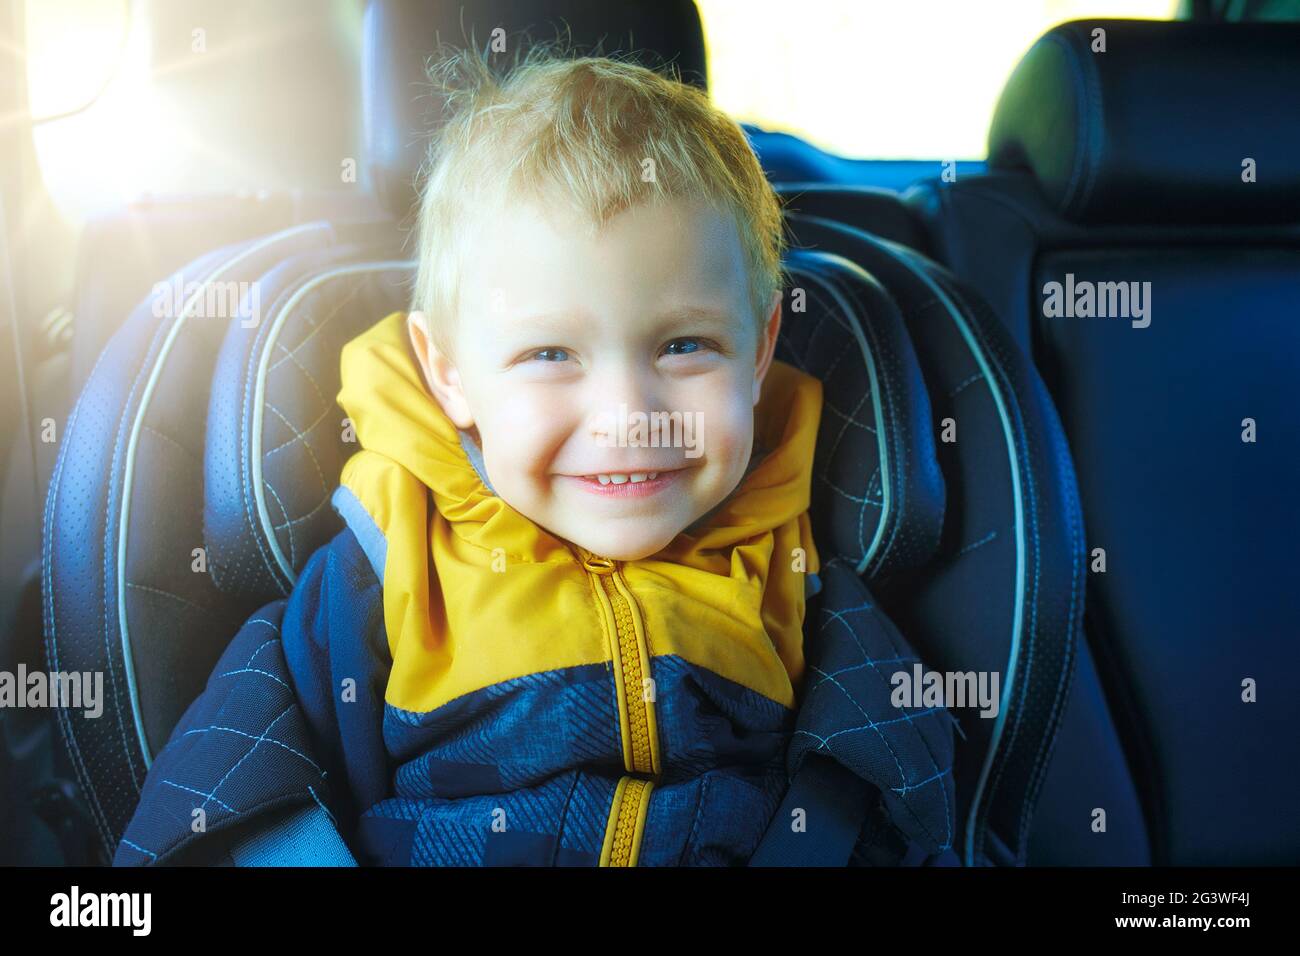 A blond toddler sits in a child's car seat and smiles. This is the happy boy in the car. Care and safety while driving. Stock Photo